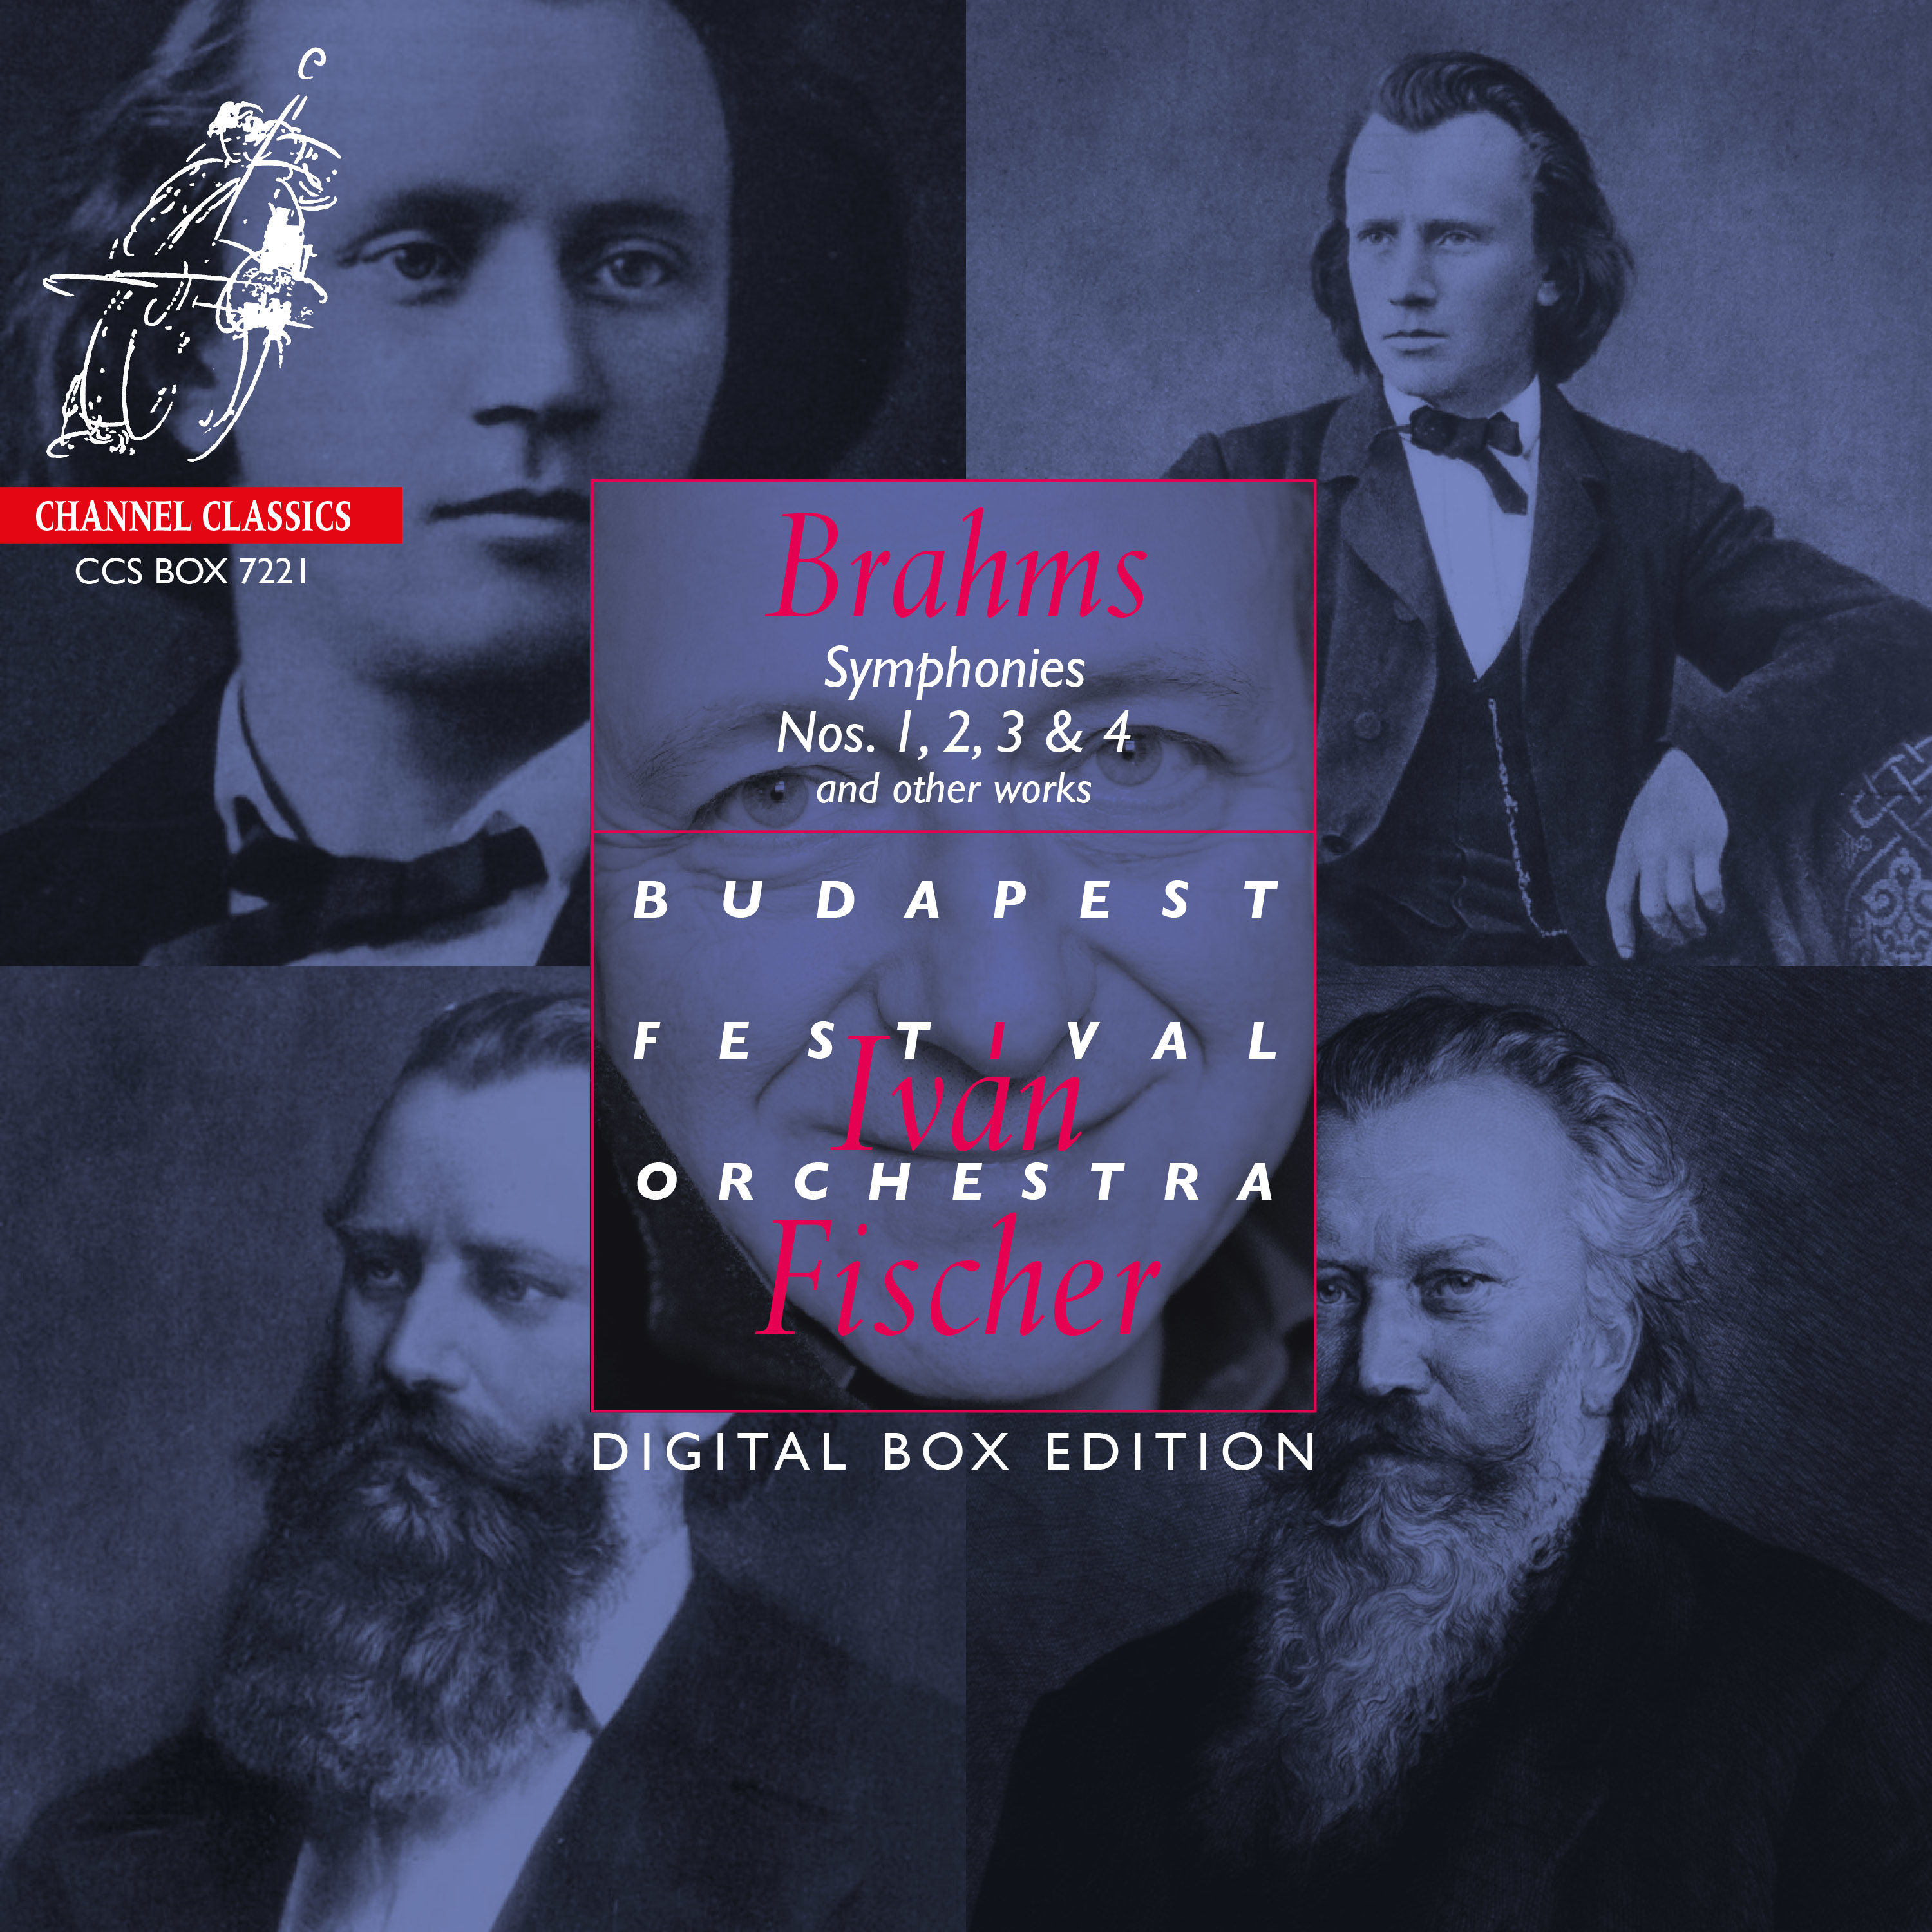 Ivan Fischer & Budapest Festival Orchestra - Brahms: Symphonies Nos. 1, 2, 3 & 4 and Other Works (2021) [FLAC 24bit/192kHz]